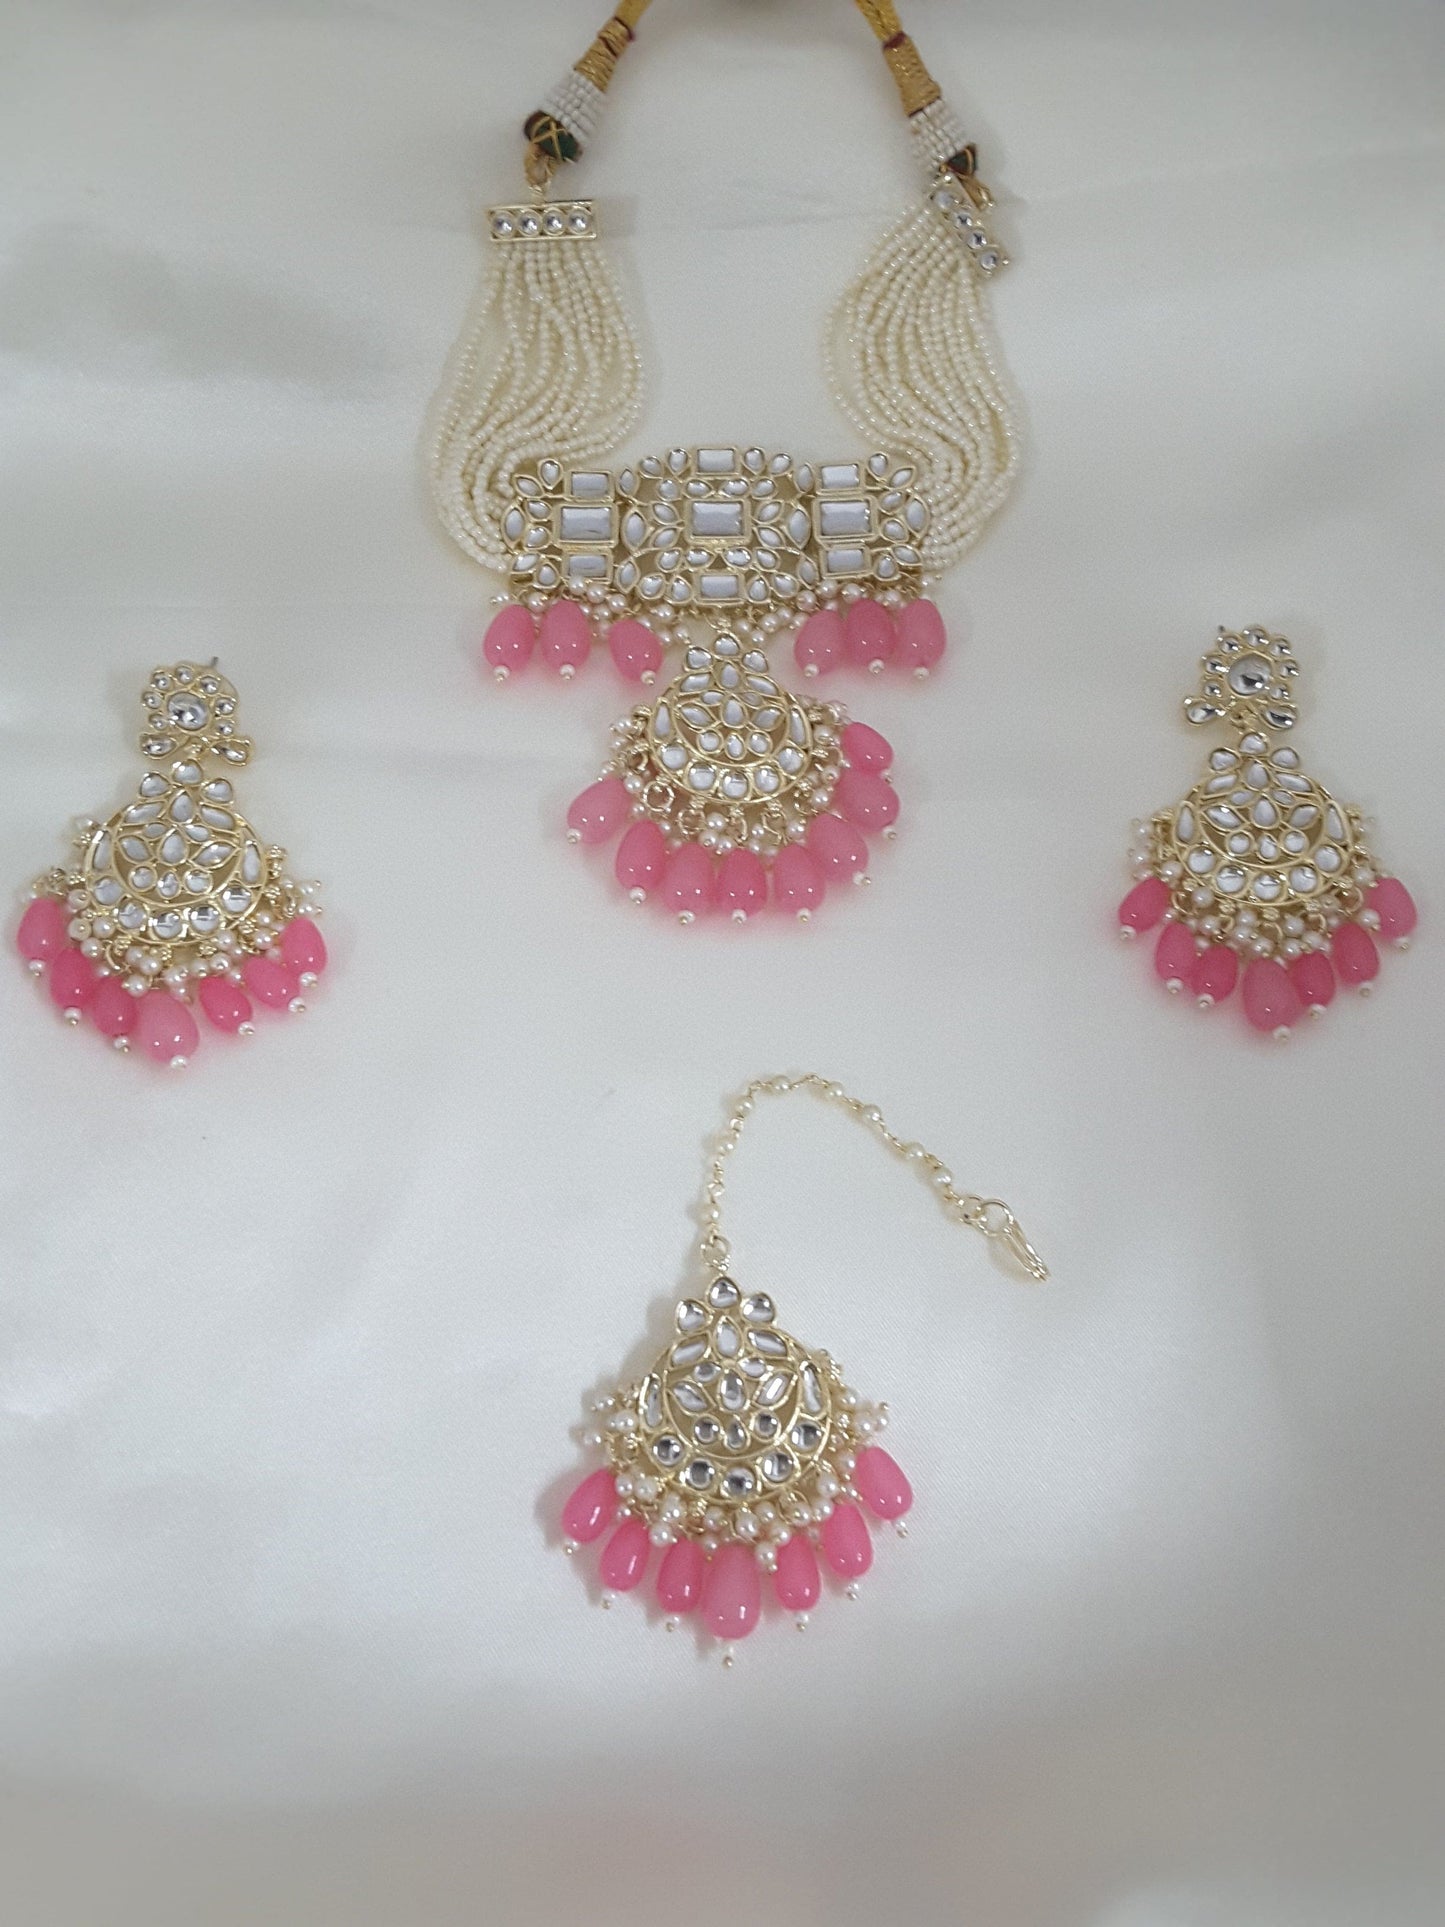 Moonstruck Traditional Indian White Kundan and Pink Beads Choker Necklace Earring Set with Maang tikka for Women(Pink) - www.MoonstruckINC.com